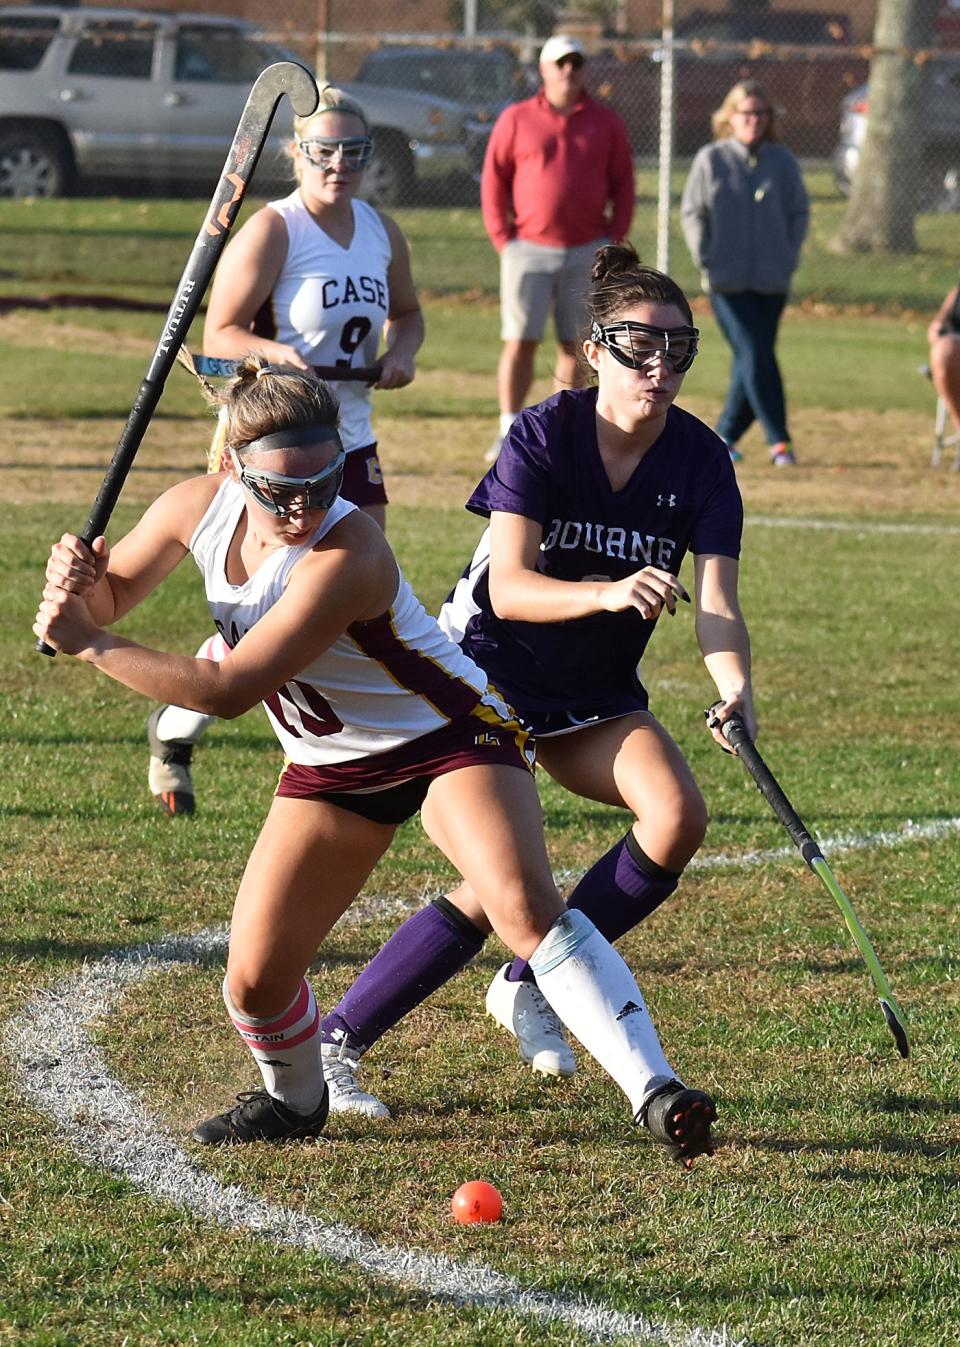 Case's Lexi Yost takes a shot against Bourne in their field hockey game in Swansea on Wednesday.